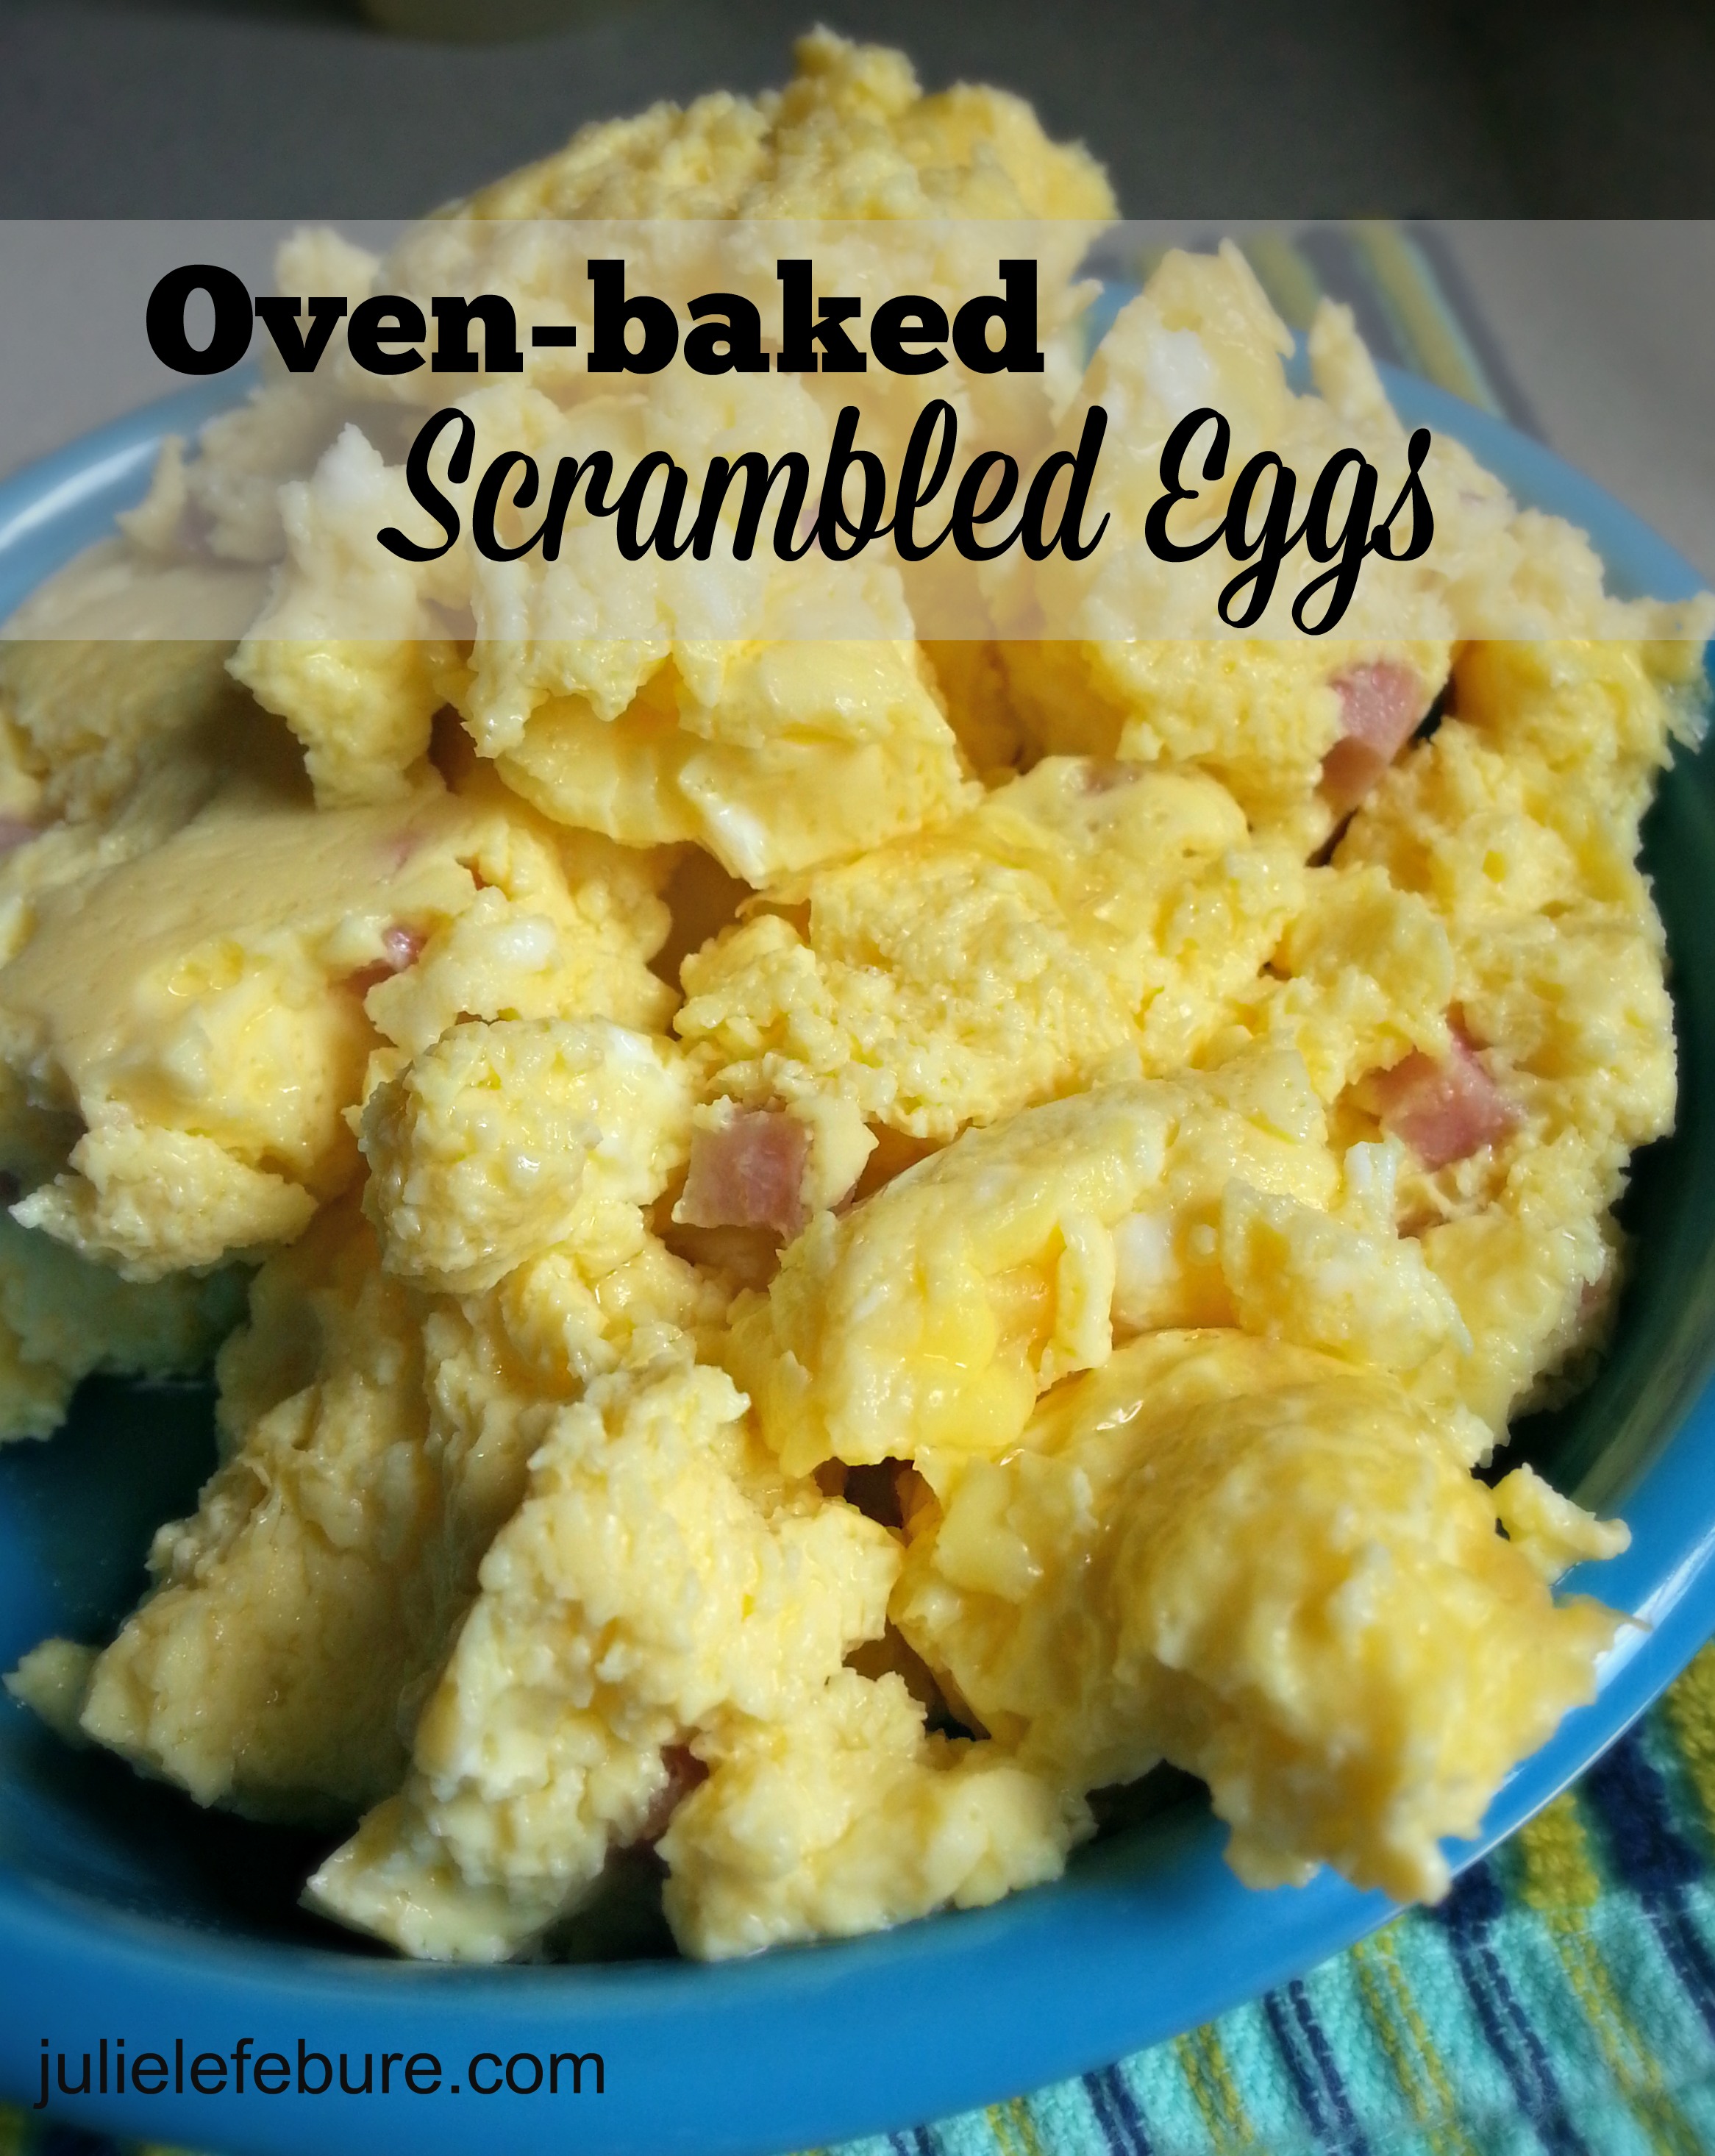 Oven-baked Scrambled Eggs